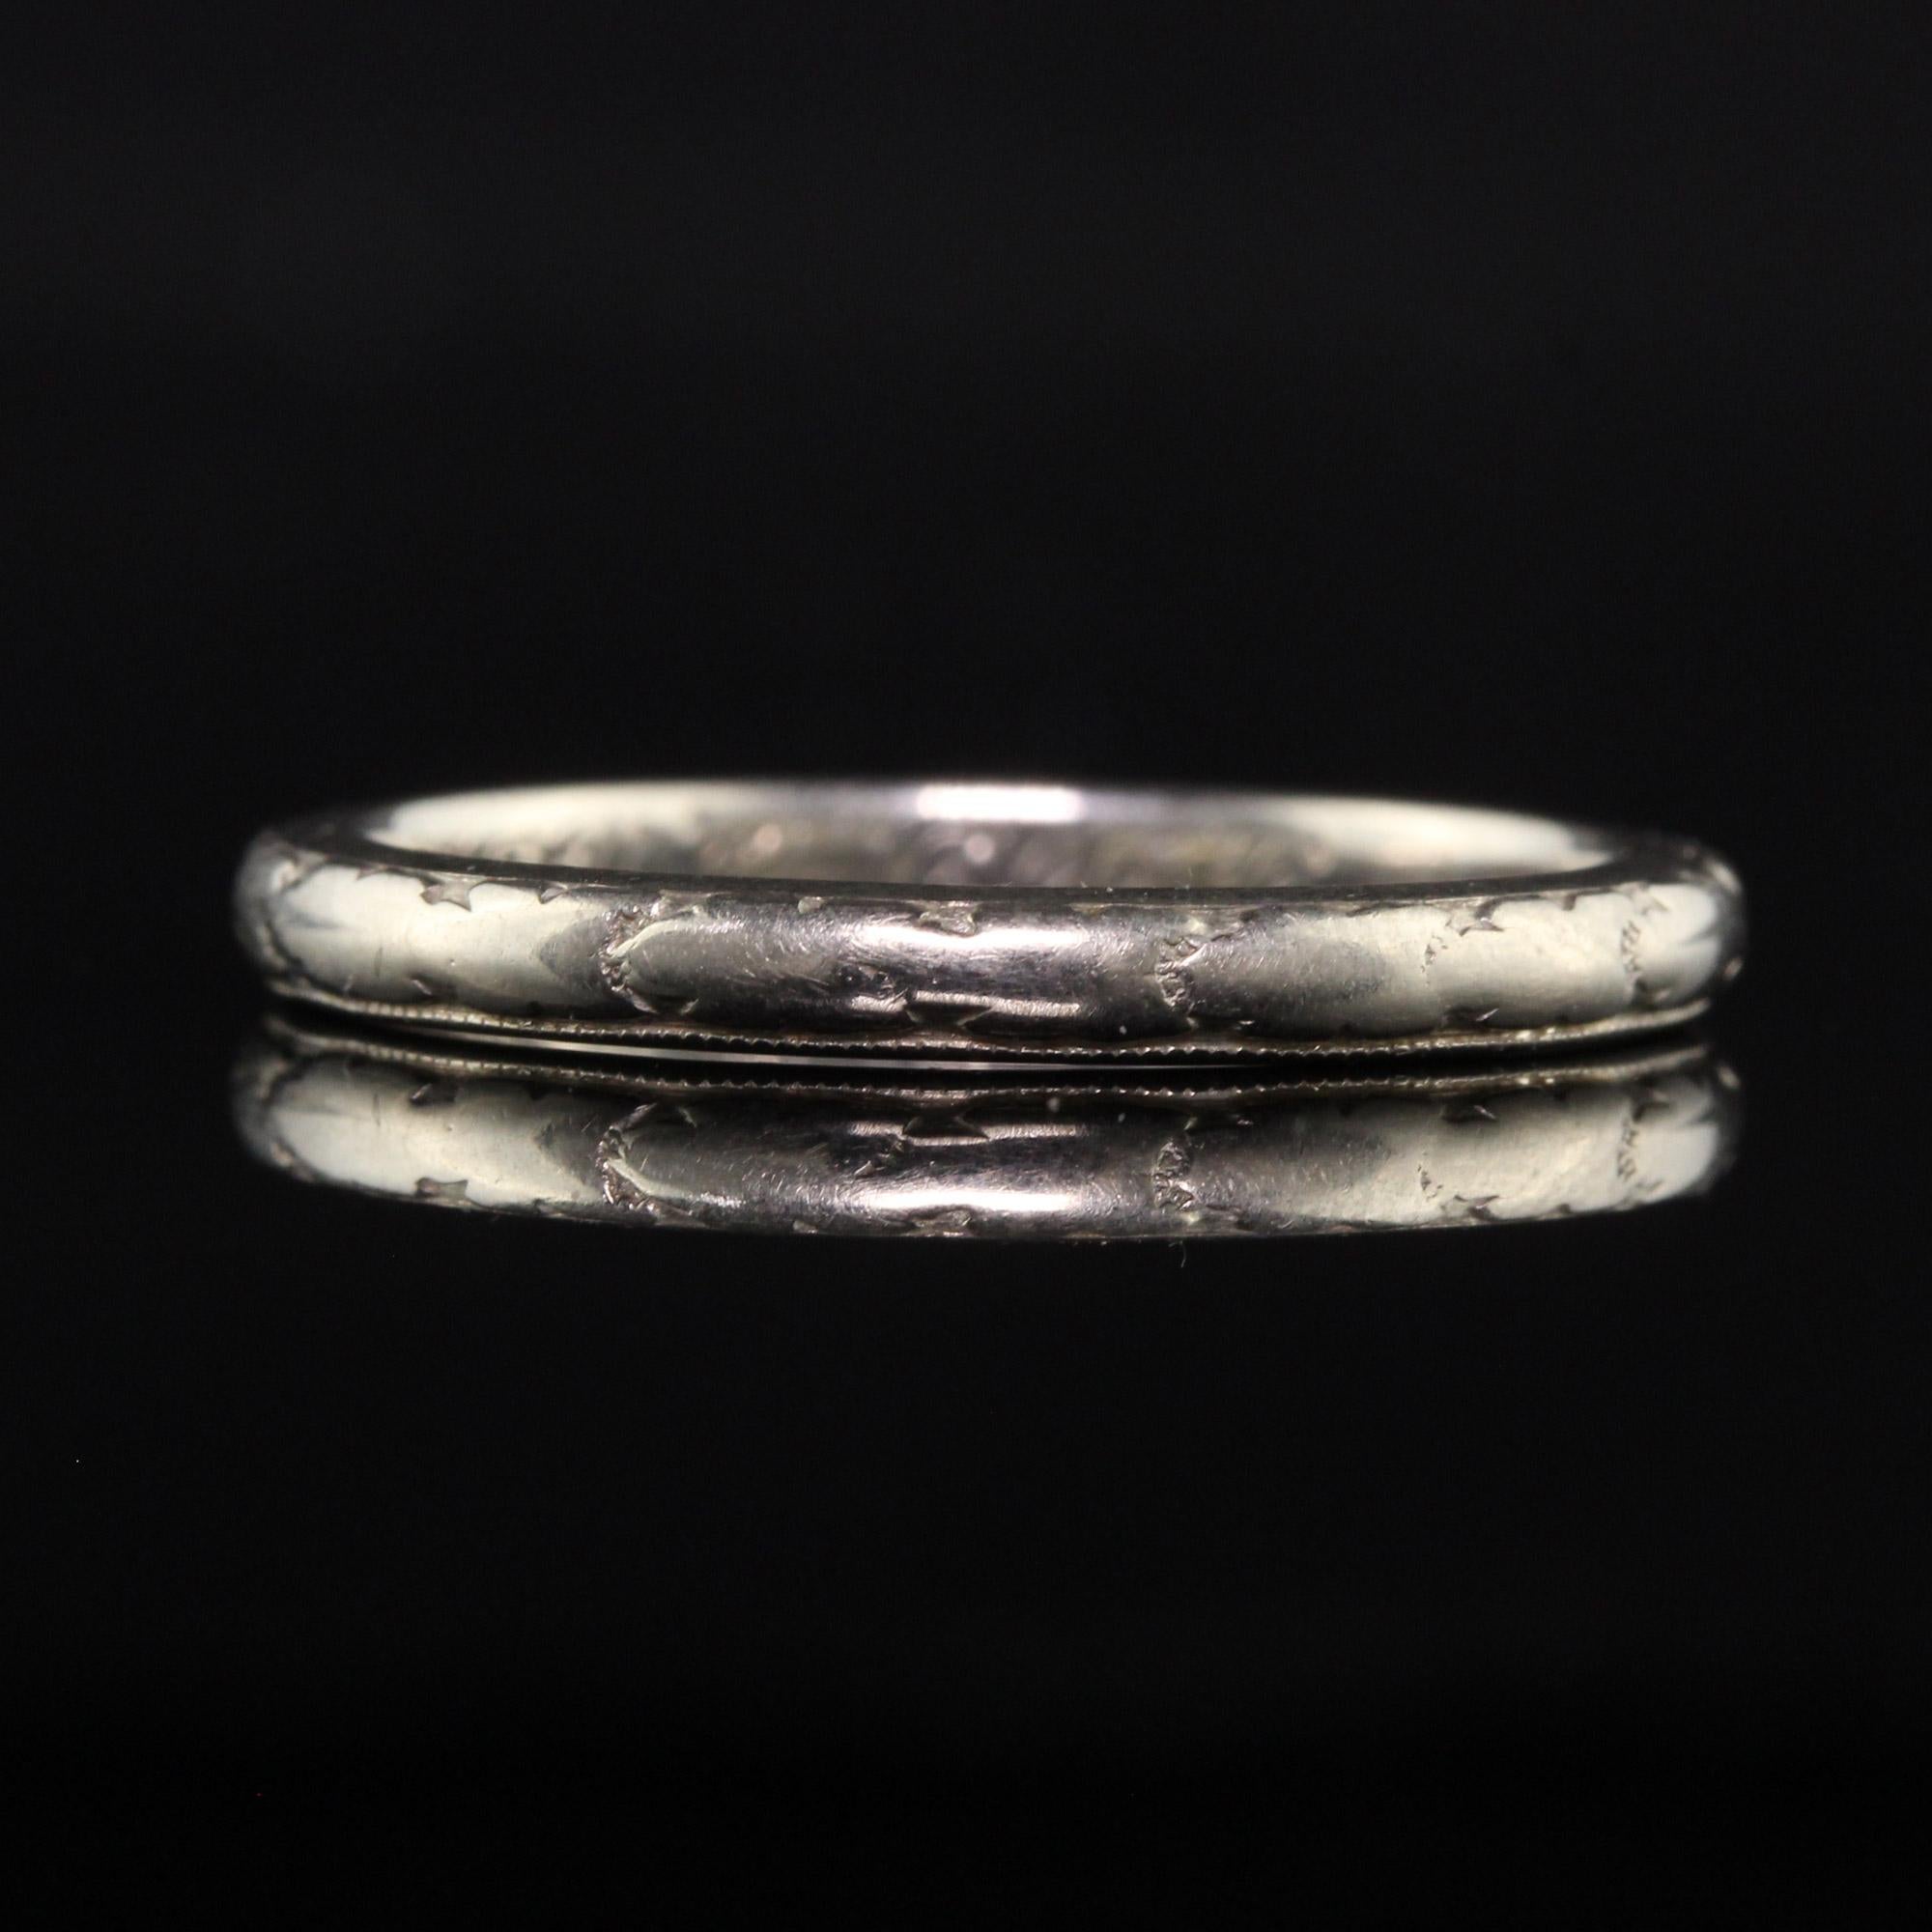 Antique Art Deco 18K White Gold Orange Blossom Engraved Wedding Band In Good Condition For Sale In Great Neck, NY